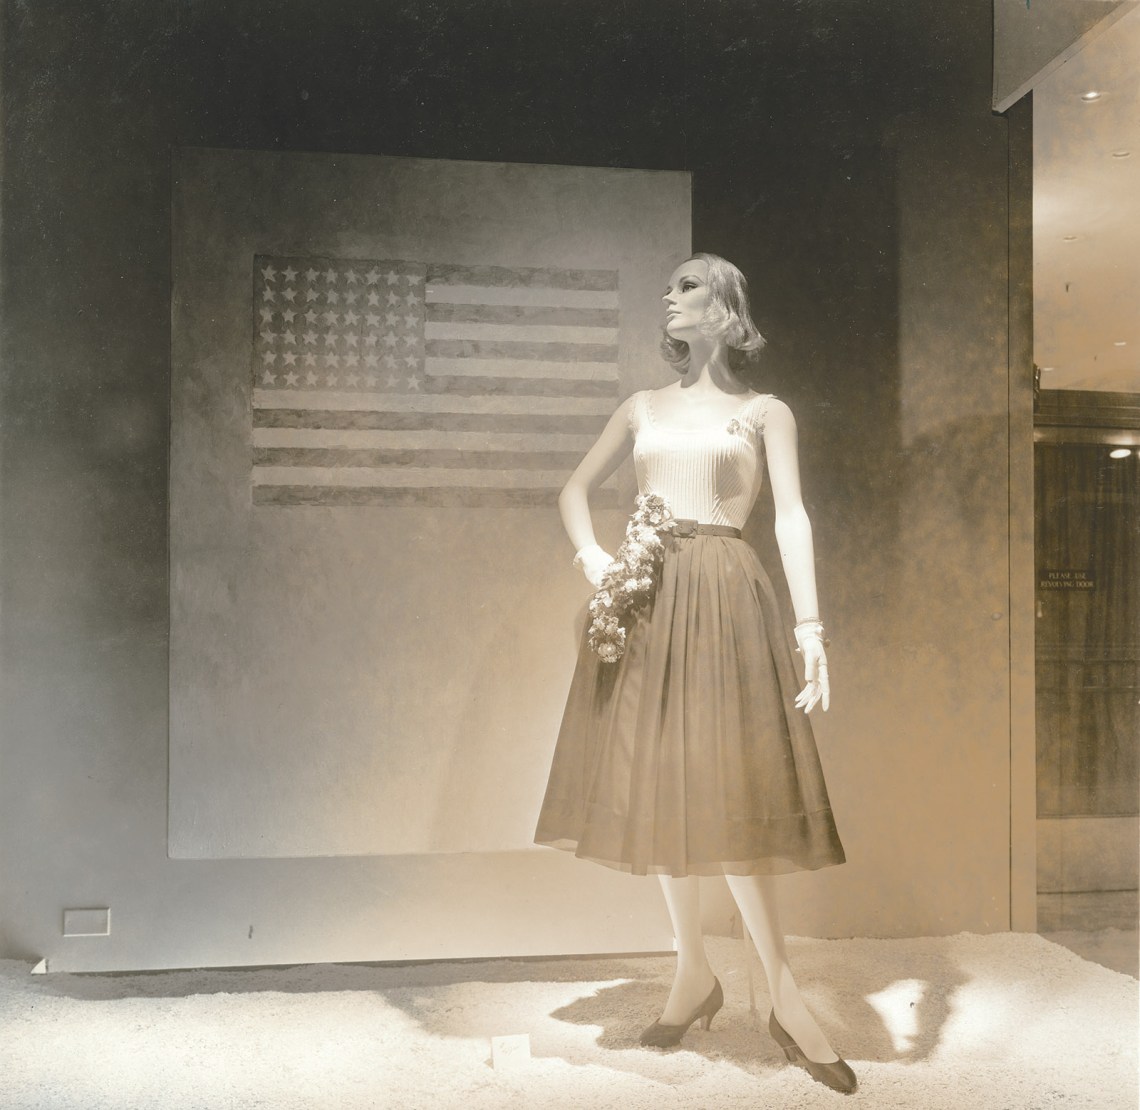 A window display at the Bonwit Teller department store featuring Flag on Orange Field (1957) by Jasper Johns, New York City, 1957